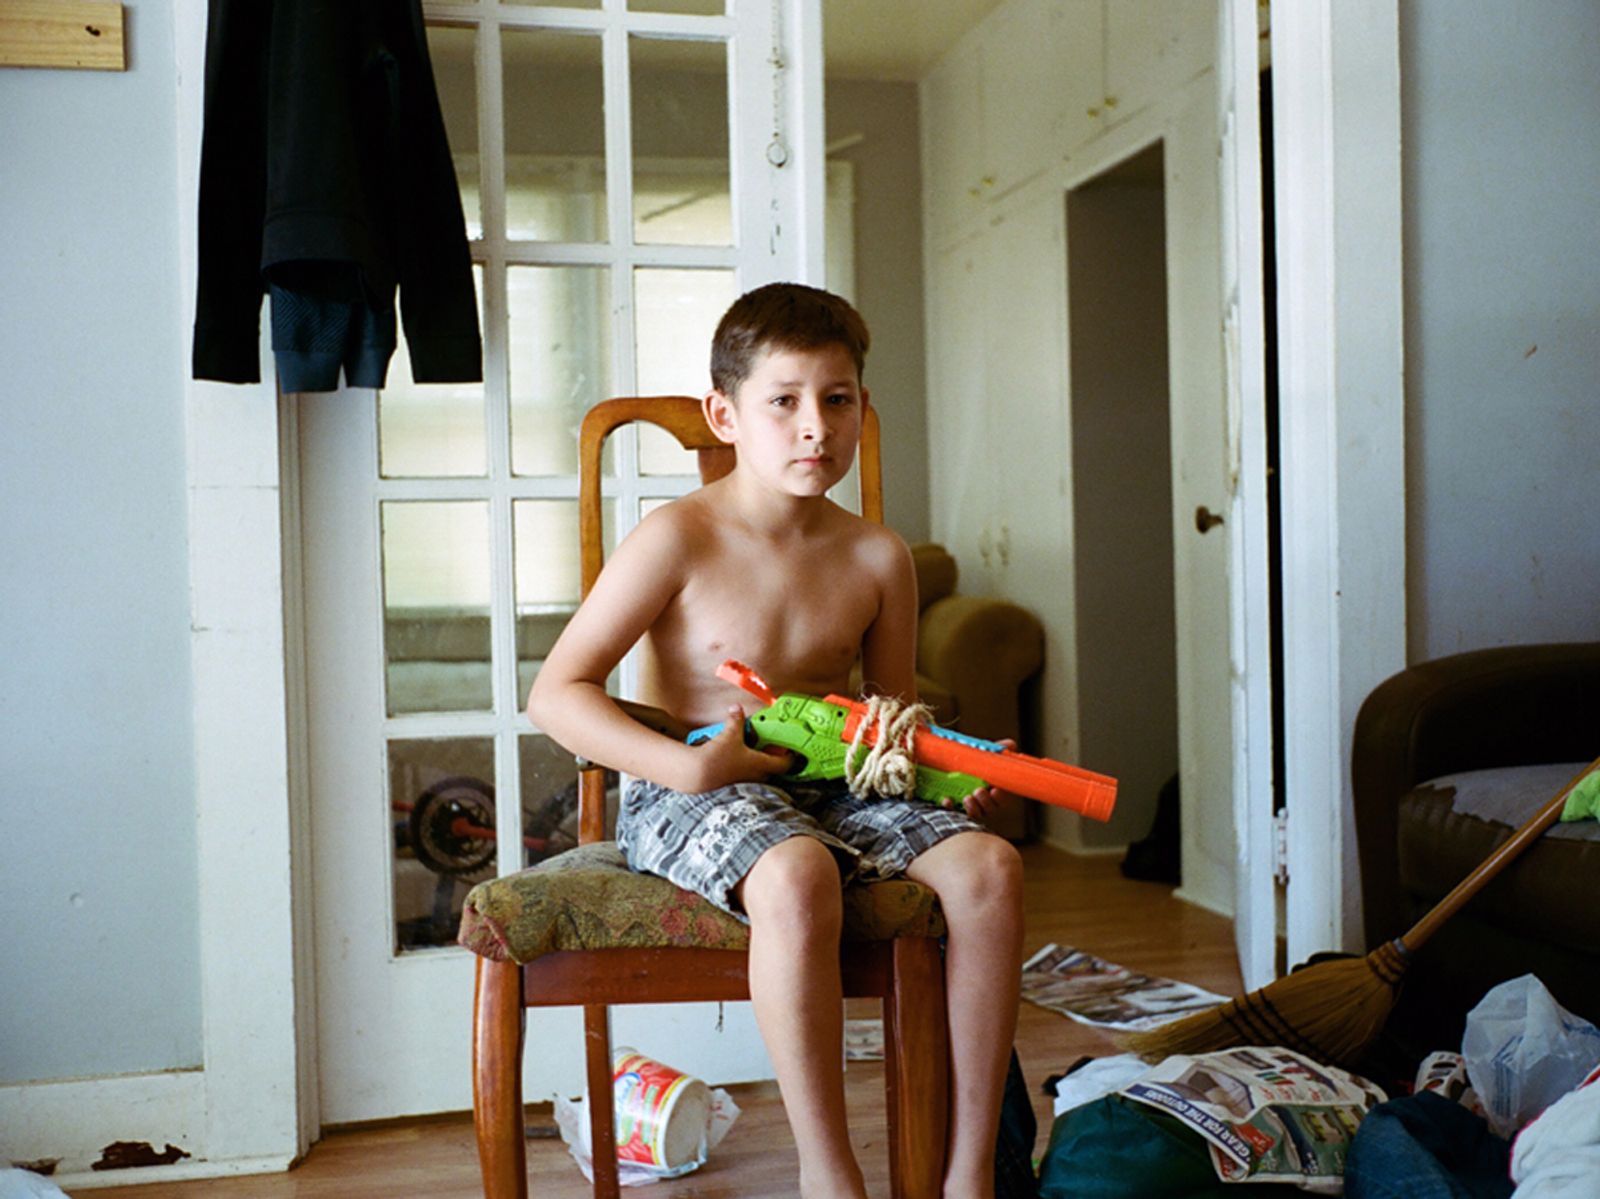 © Matteo Buonomo - Image from the Love Mom photography project